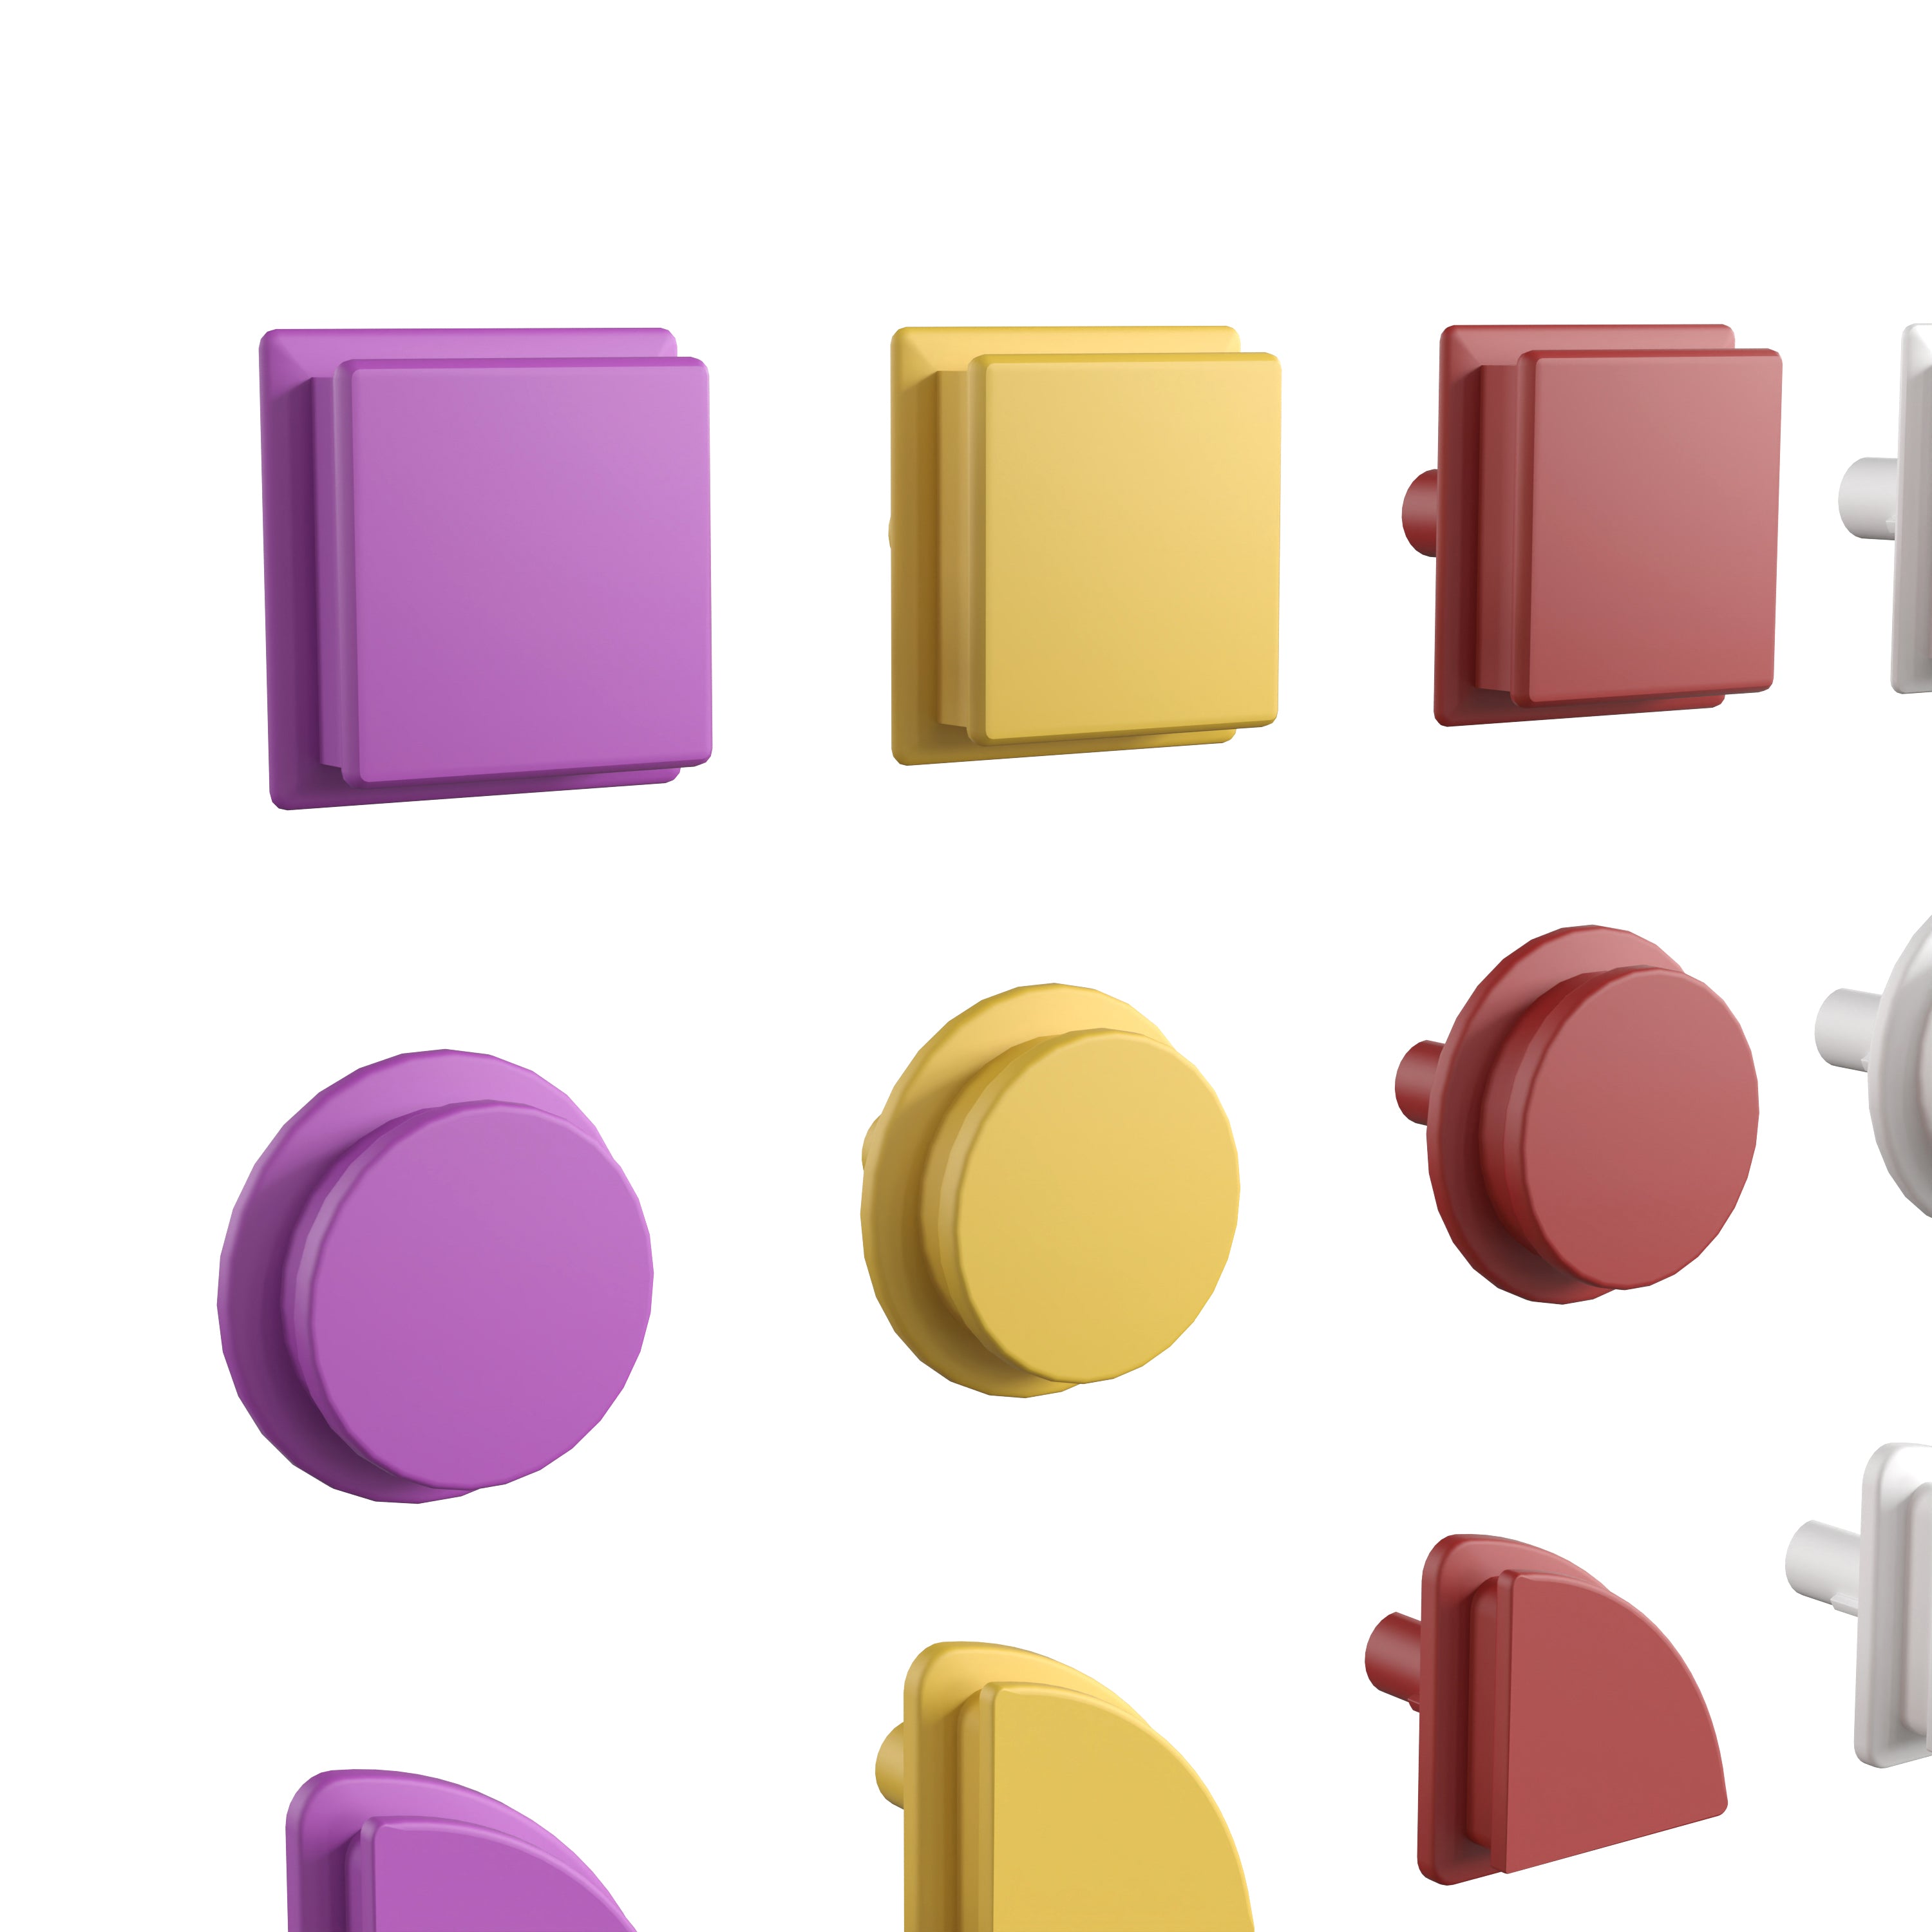 Bright Beginnings Commercial Grade 256 Piece Shape Set for Modular STEAM Wall Systems-STEM Wall Accessories-Flash Furniture-Wall2Wall Furnishings